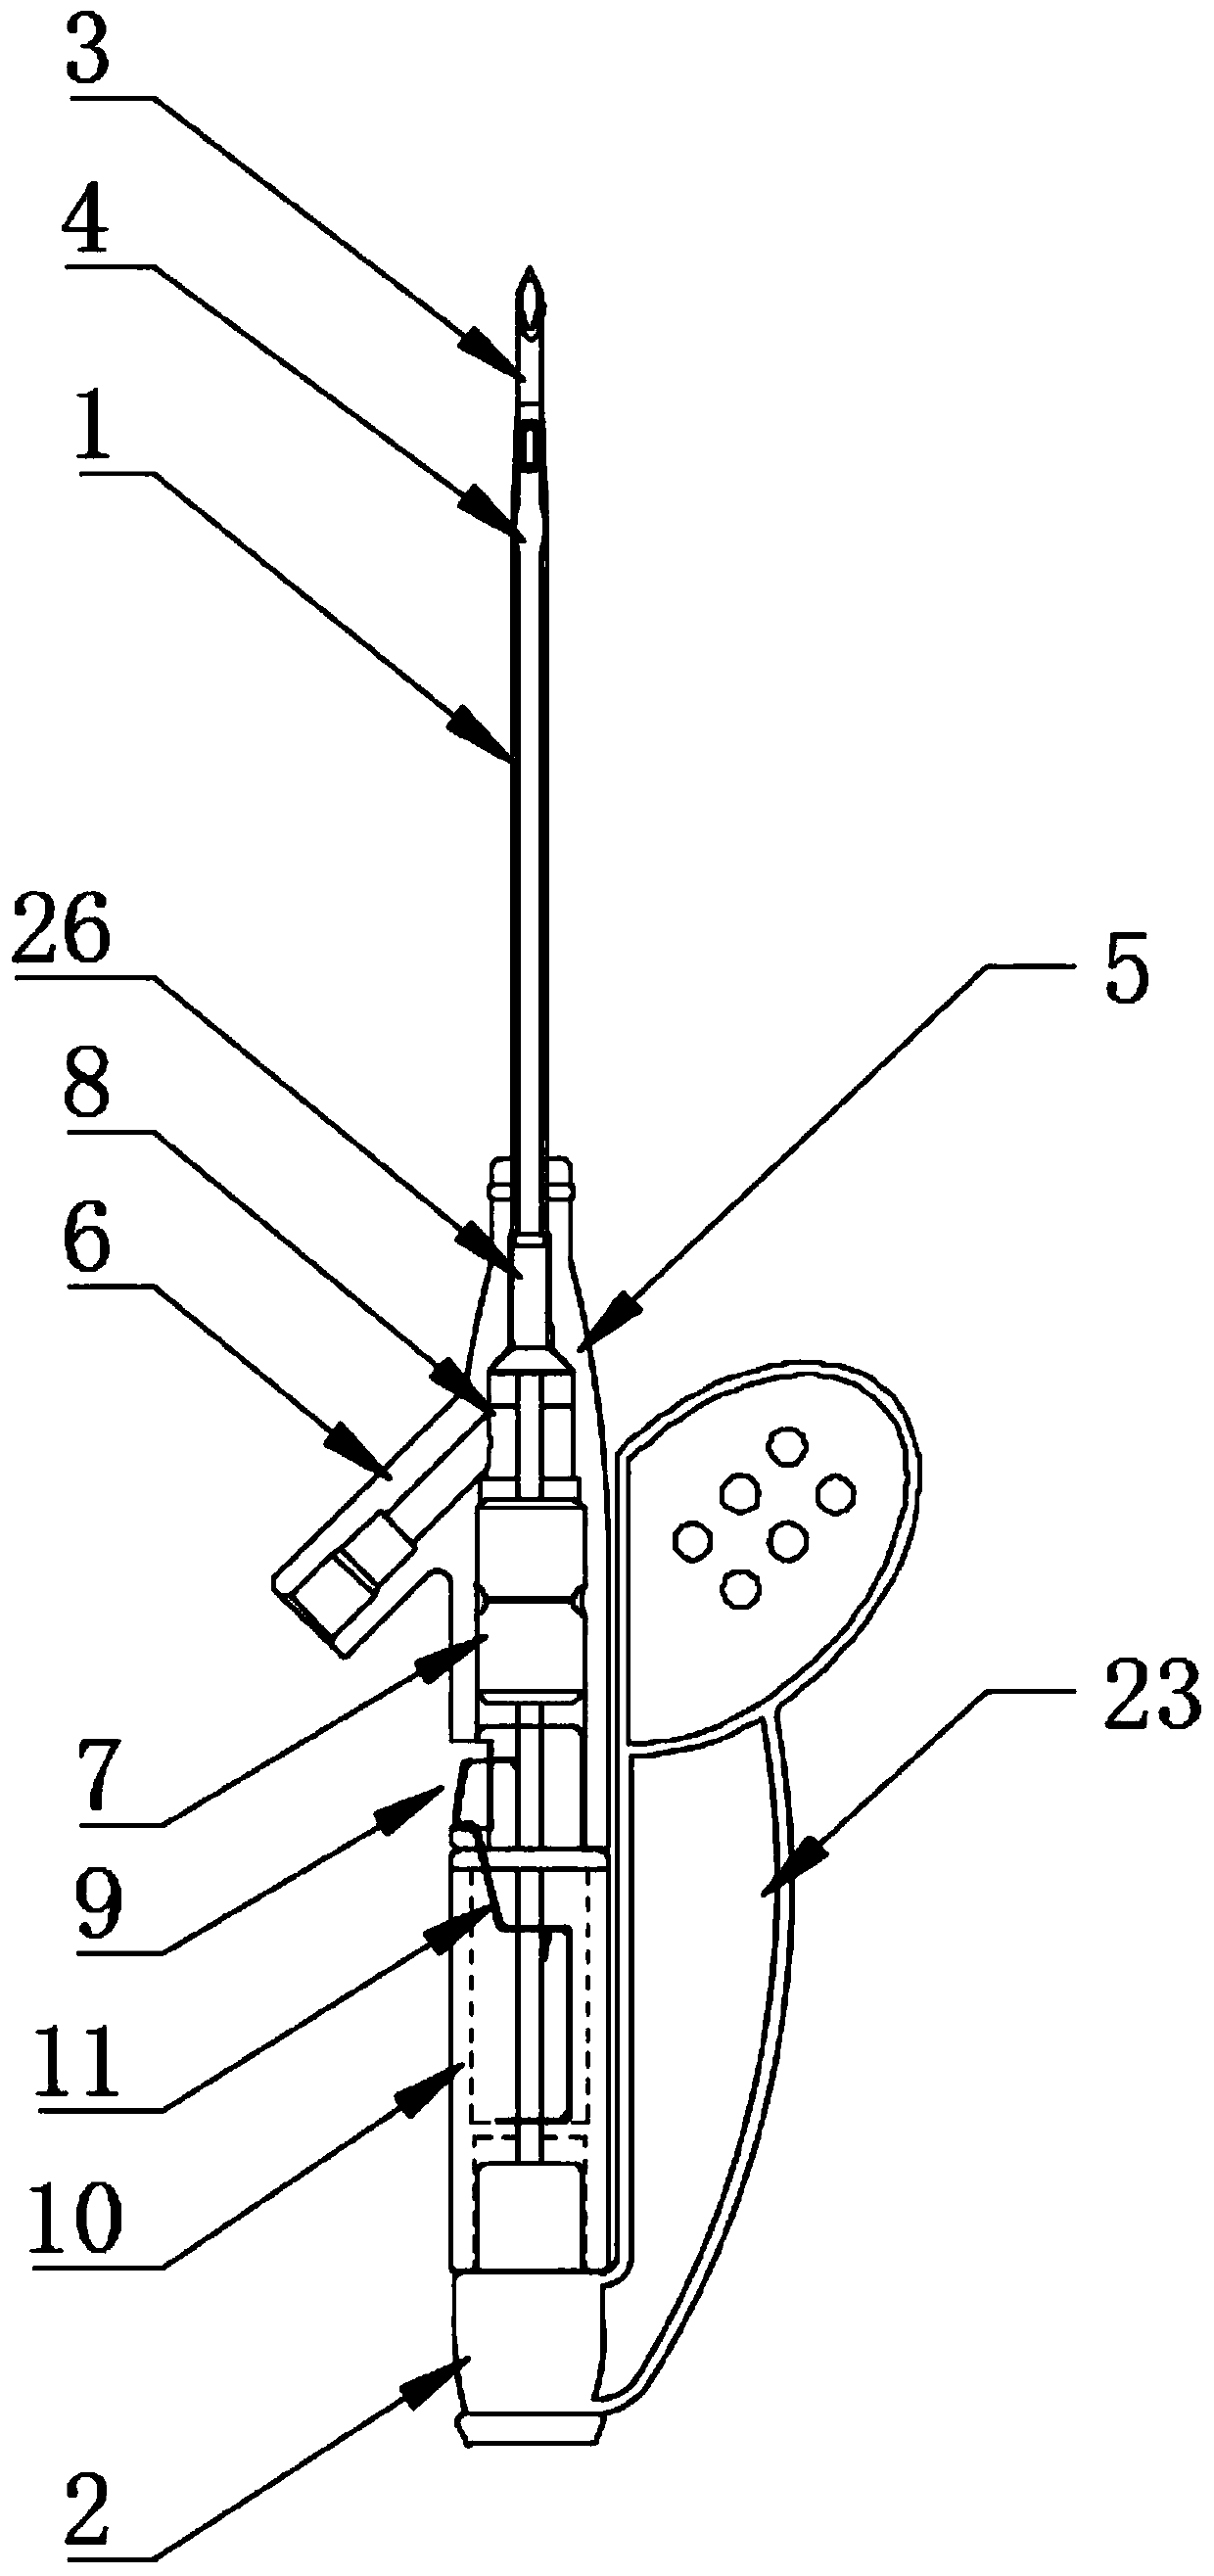 Anti-puncture remaining needle assembly